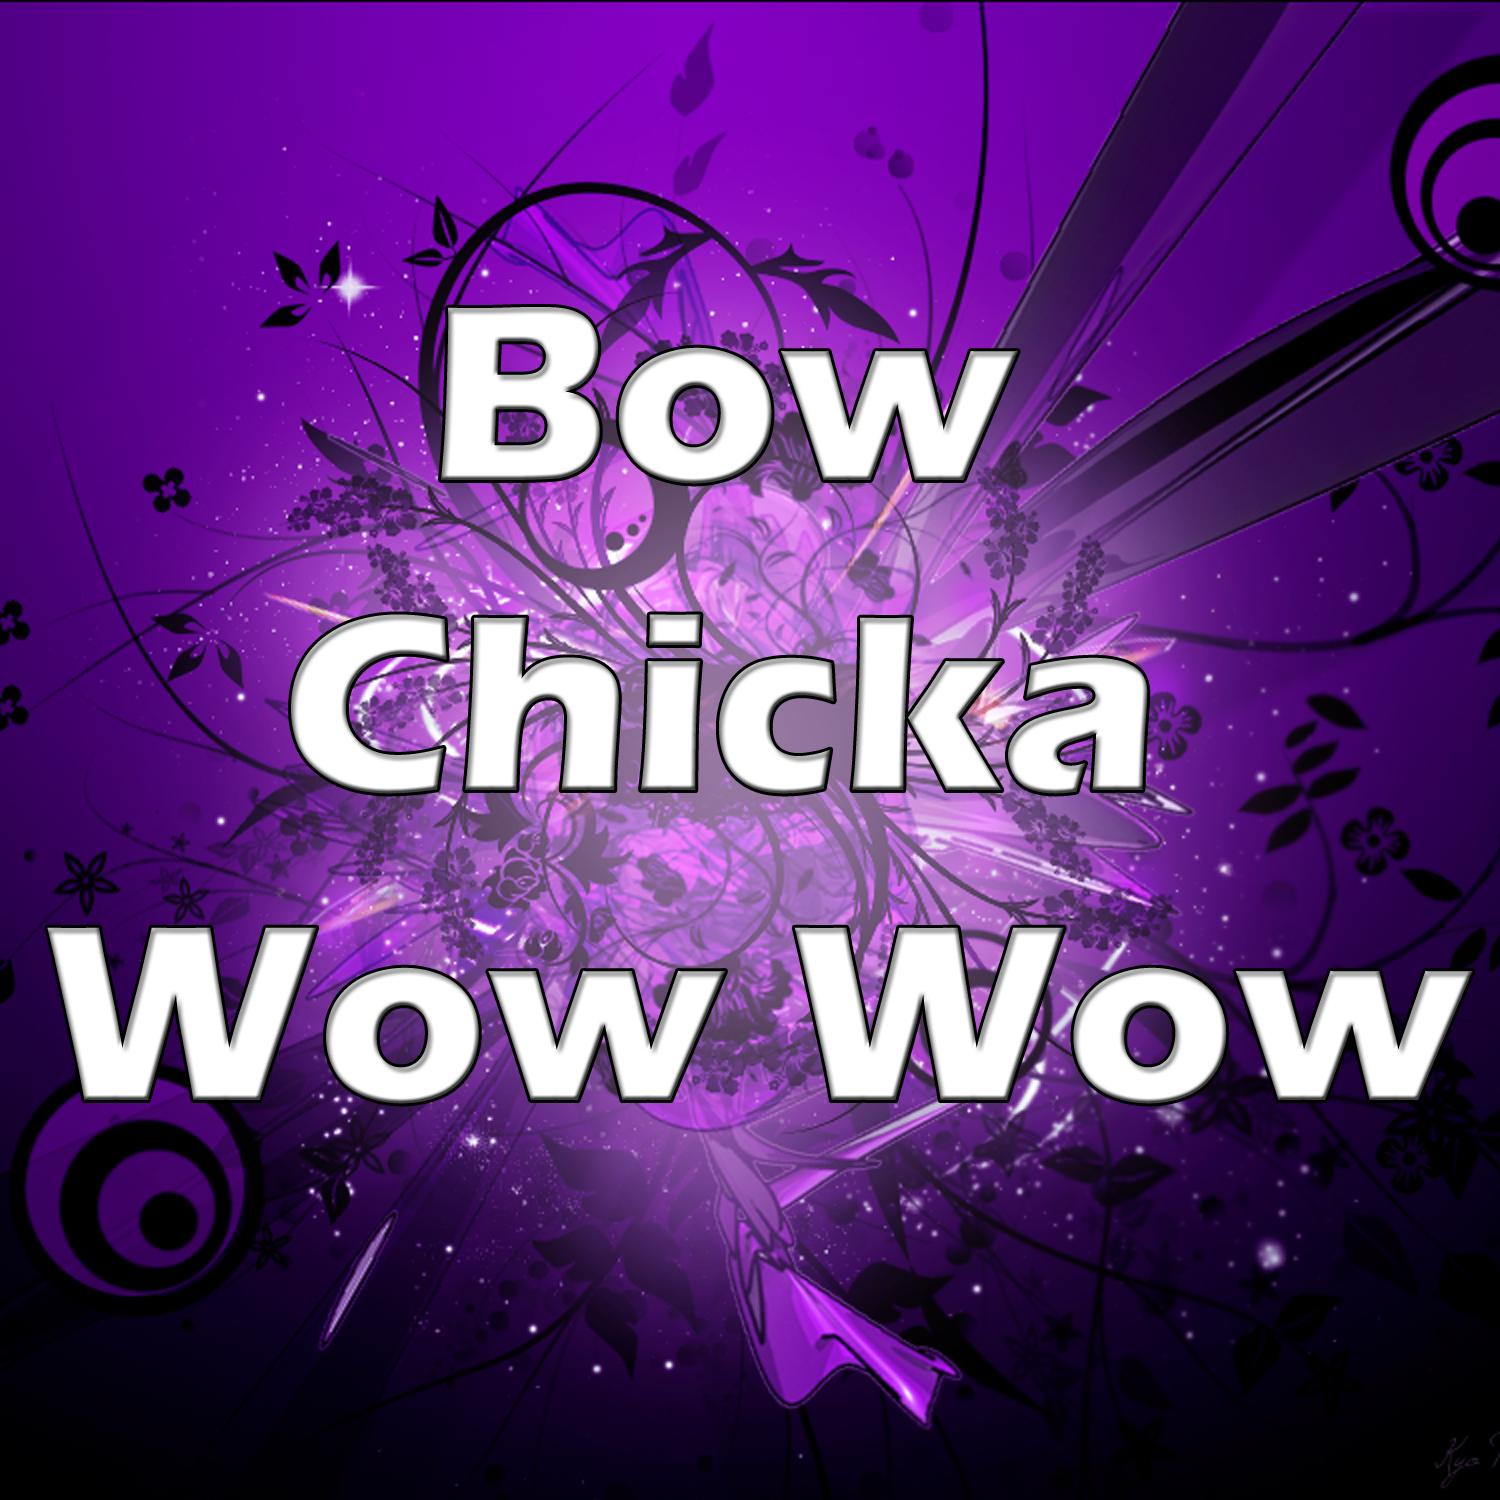 Bow chicka bow wow meaning